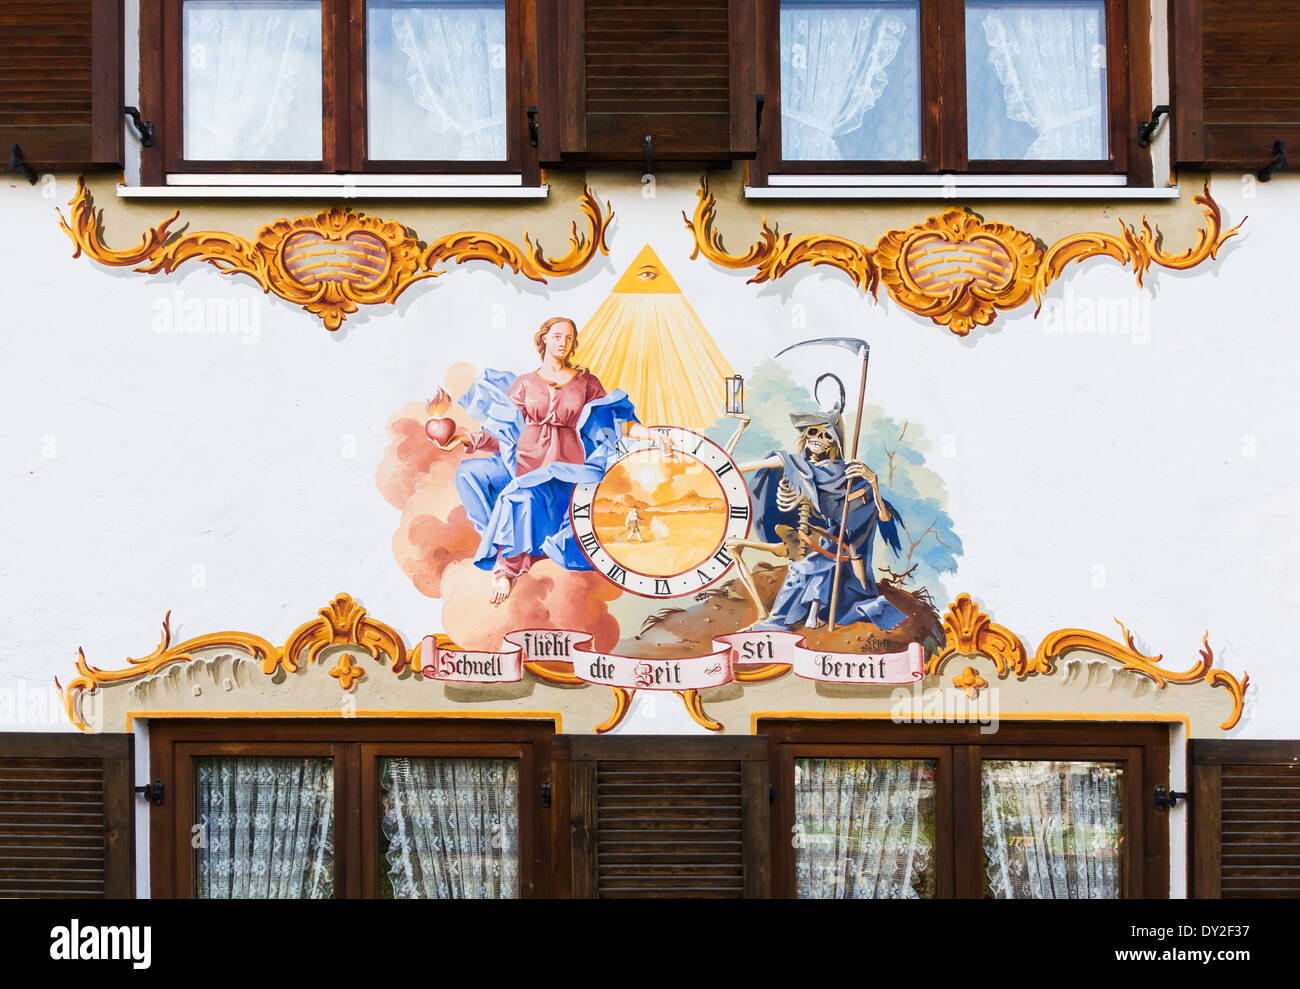 Mural 'Time goes quickly, be ready', Oberammergau, Bavaria, Germany. Stock Photo